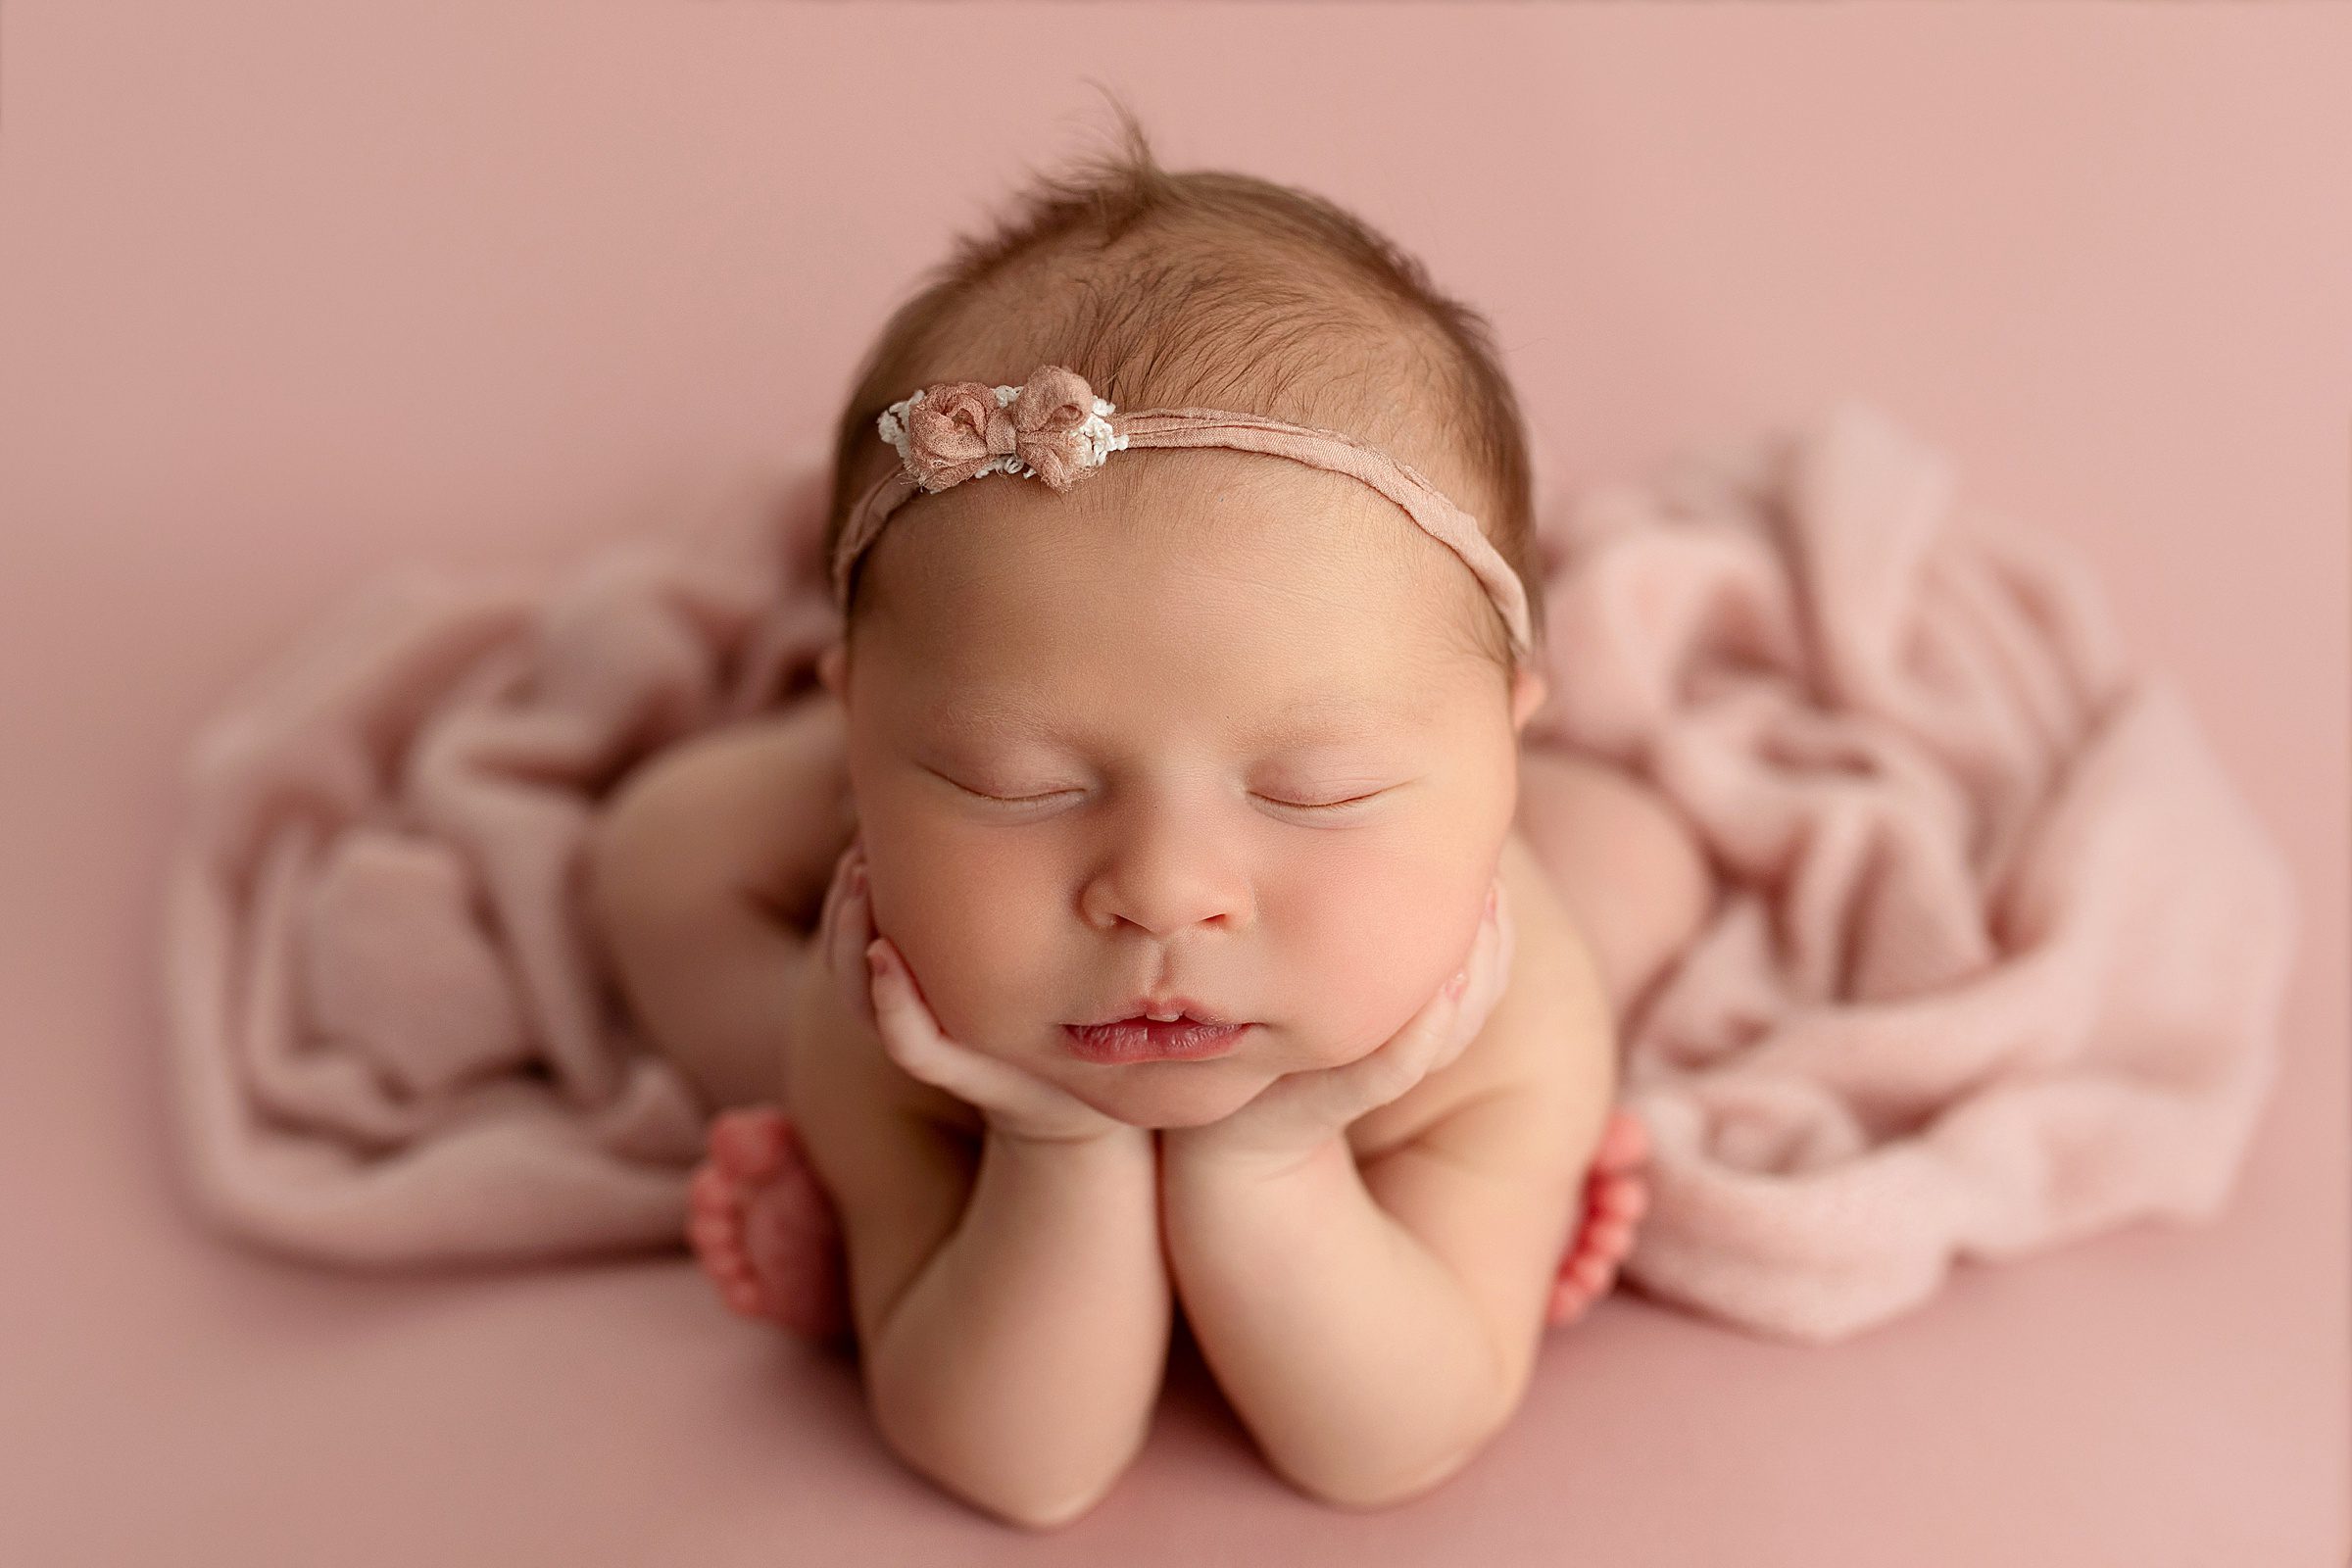 newborn baby girl in froggy pose on pink backdrop with tiny pink bow during newborn photography photo shoot in northwest arkansas studio